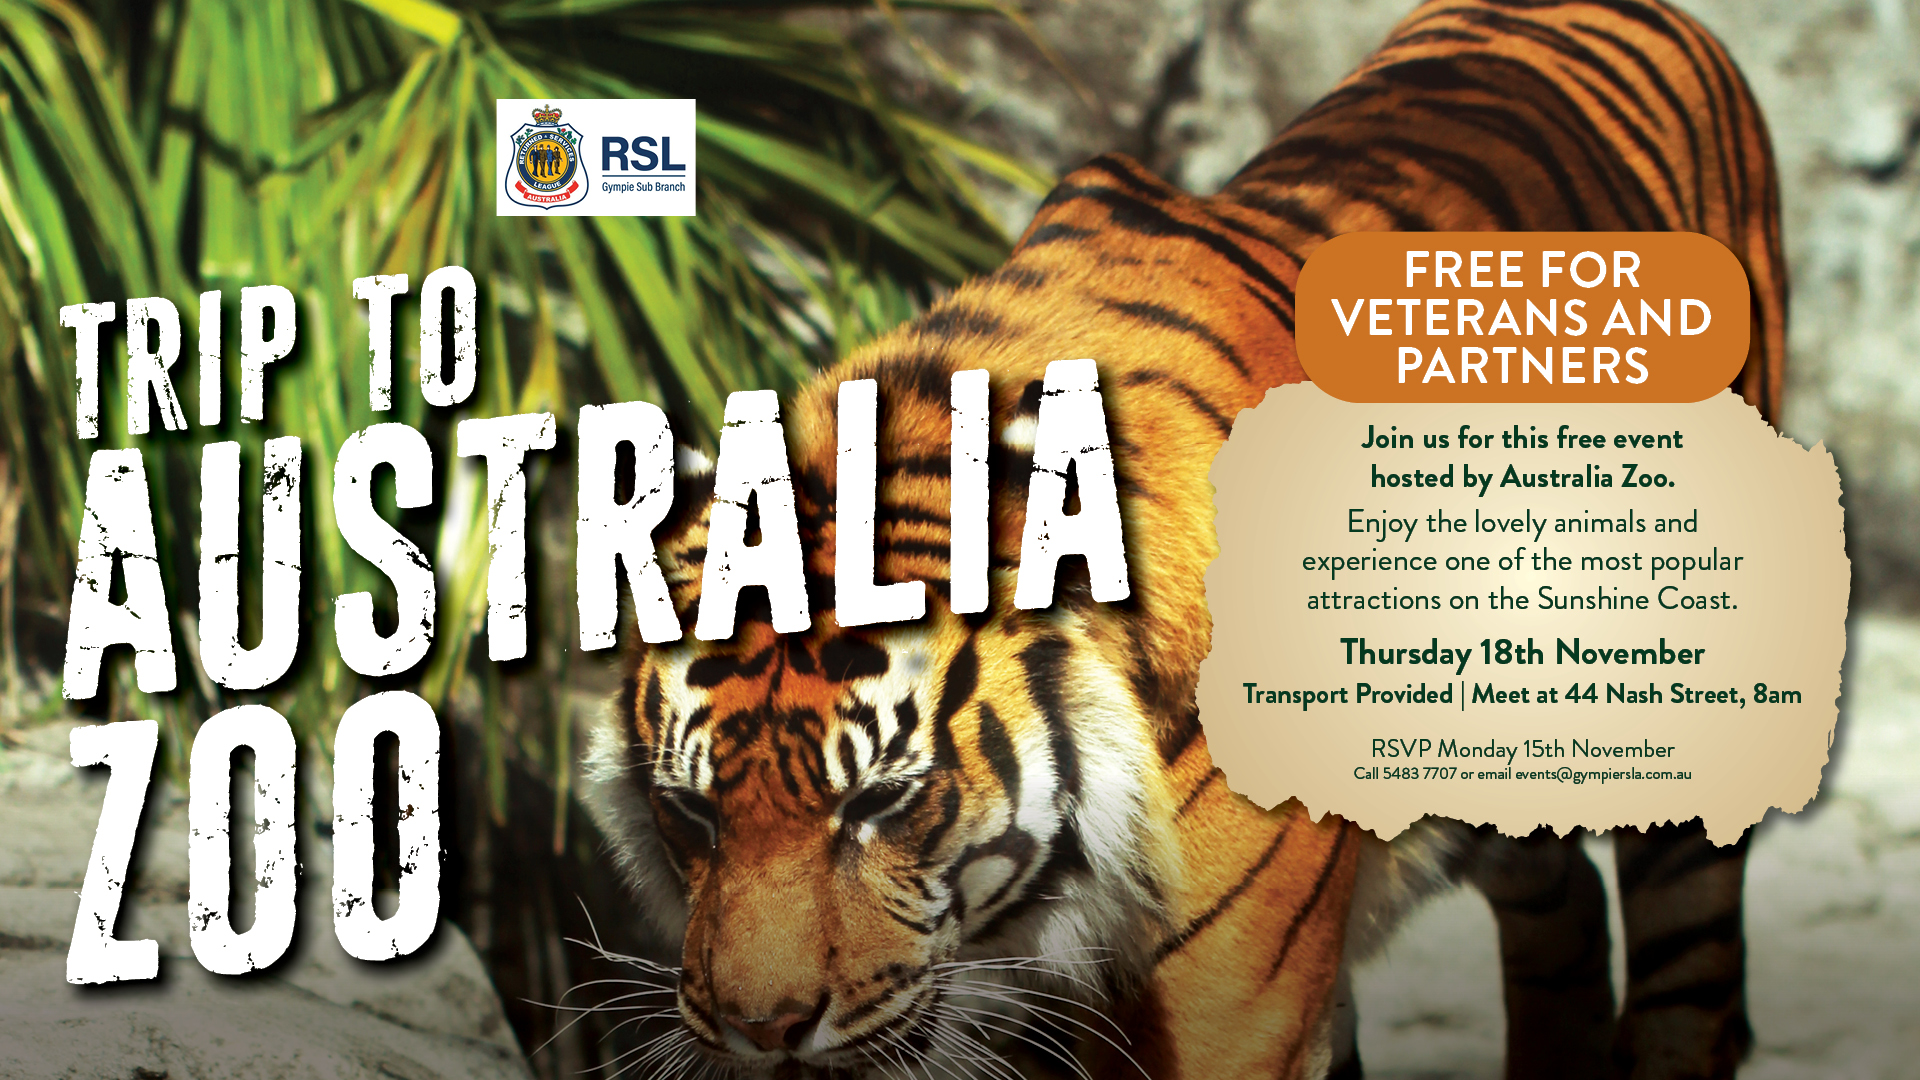 Trip to Australia Zoo - BOOKED OUT - Gympie RSL